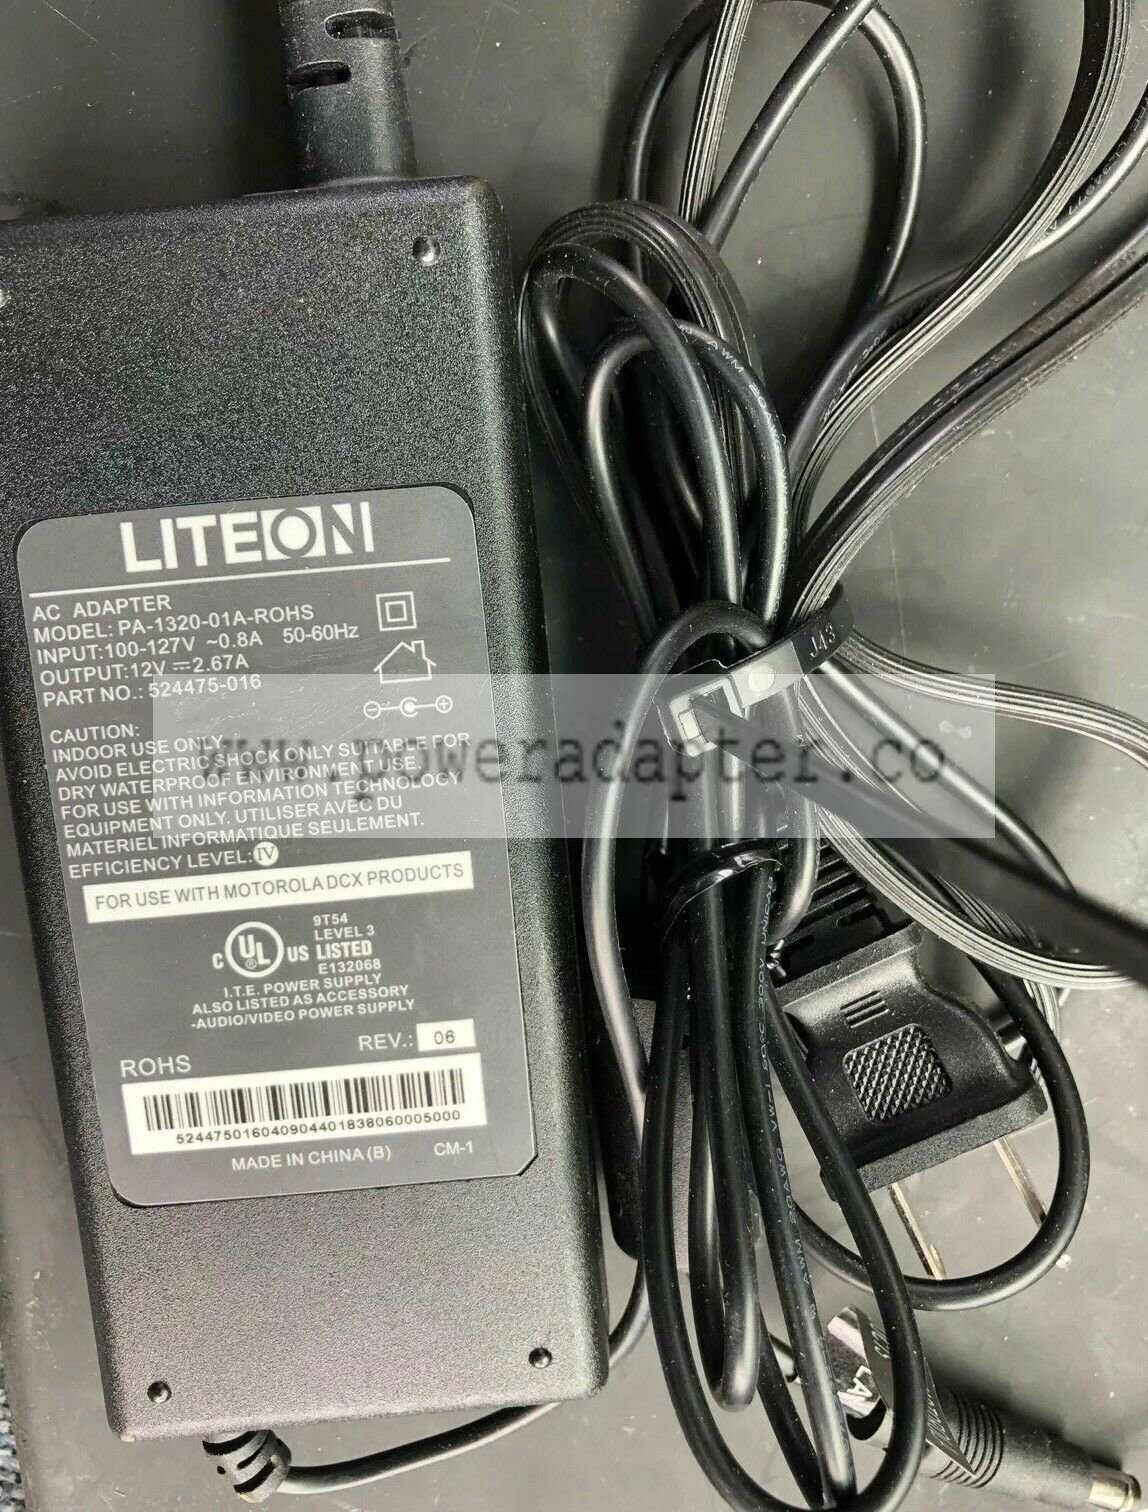 LiteOn PA-1320-01A-ROHS 524475-016 AC Adapter 12V 2.67A OEM Free Shipping Brand: LiteOn Output Voltage(s): 12V Type: